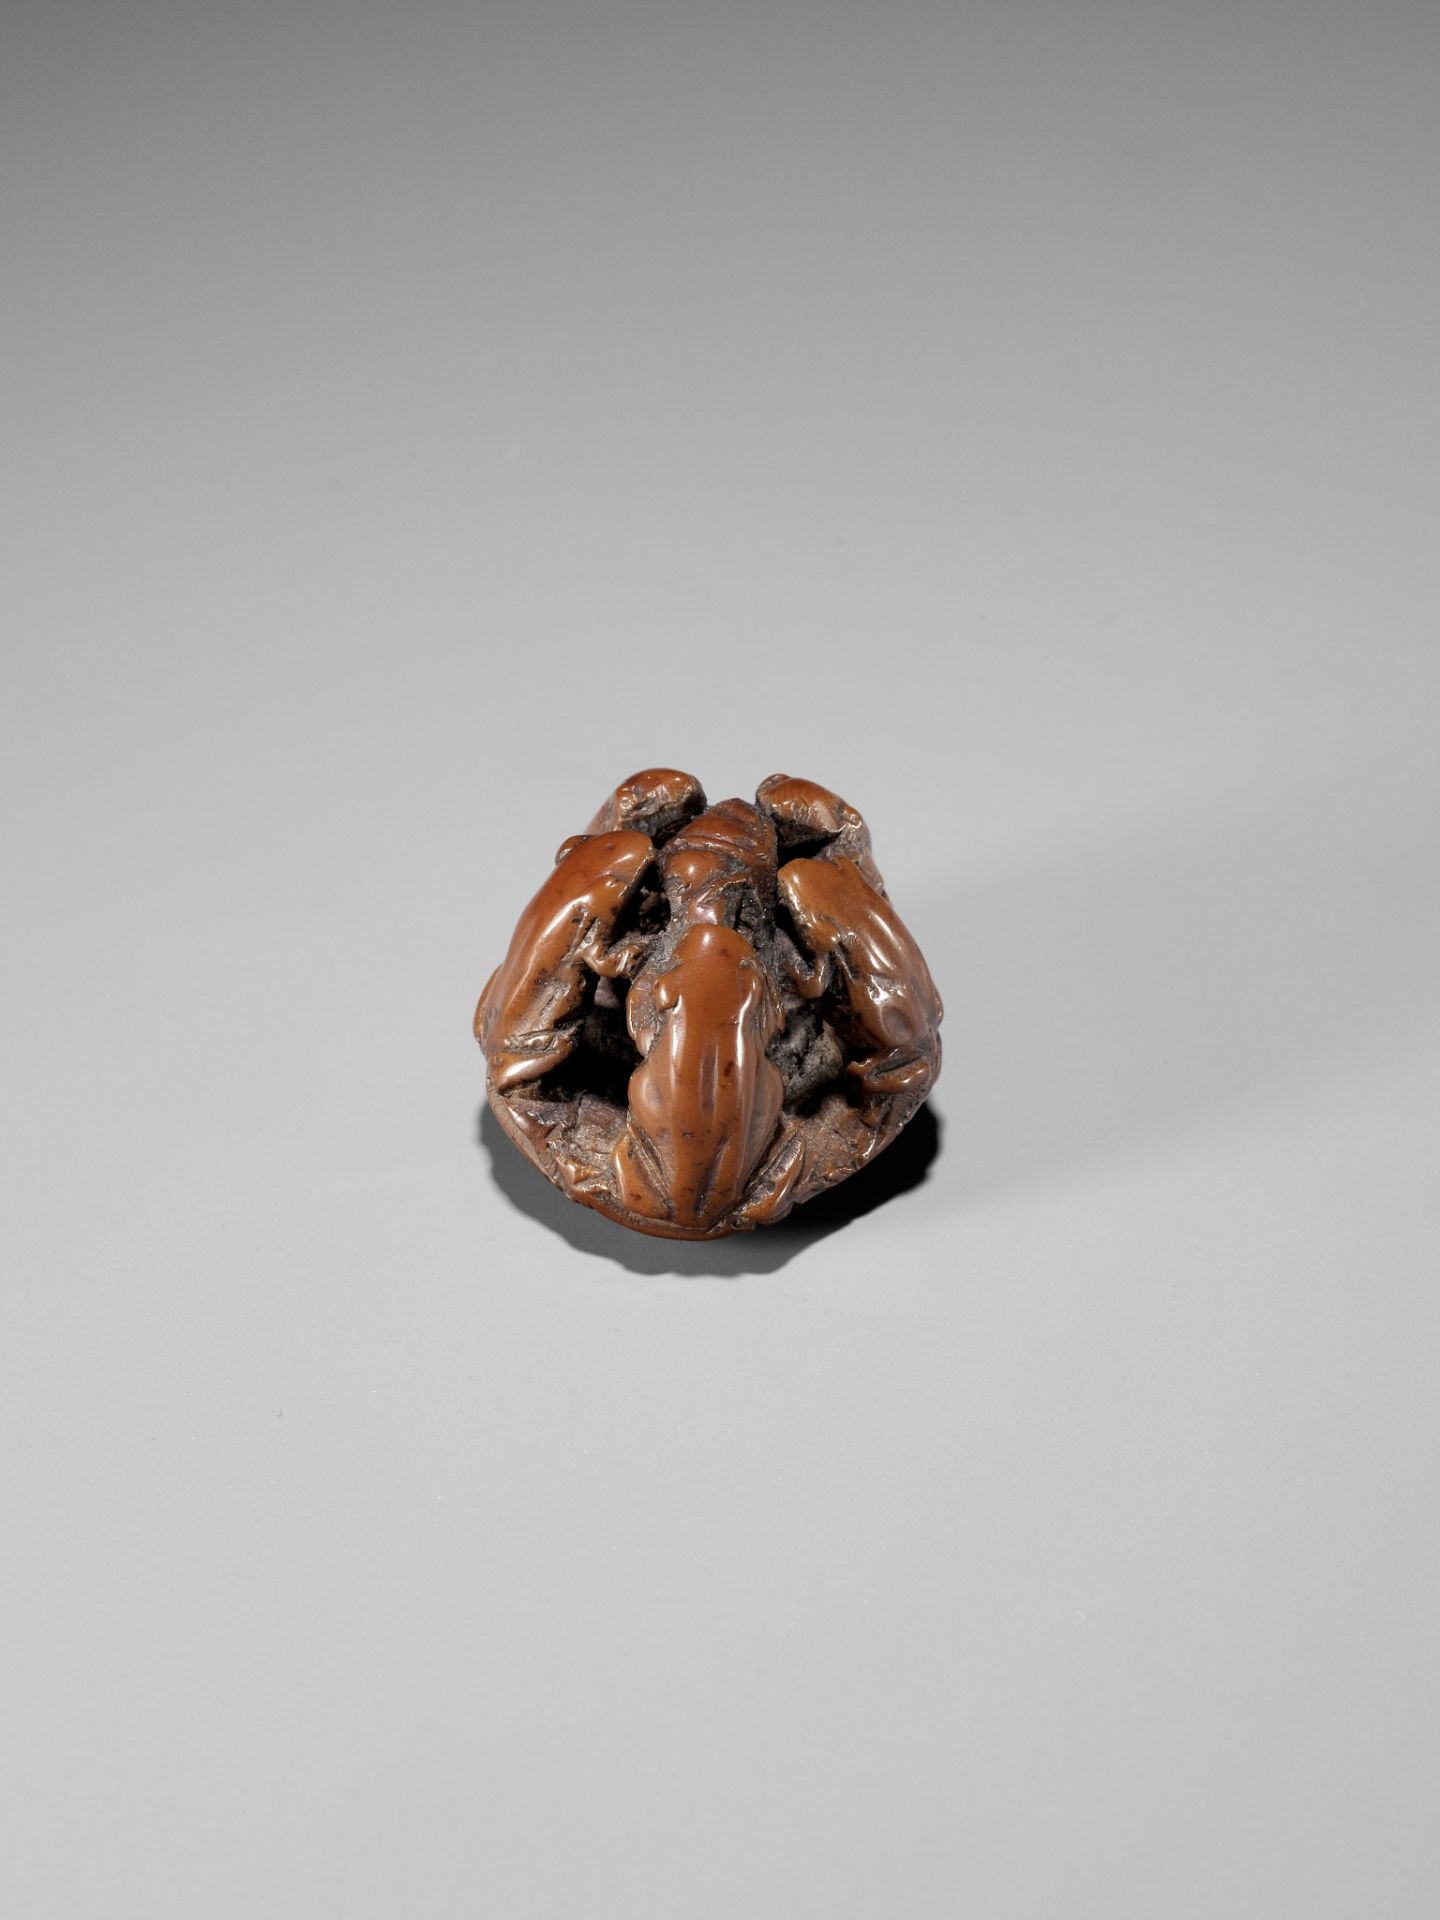 A RARE NUT NETSUKE OF FIVE FROGS ON A LOTUS LEAF, ATTRIBUTED TO SEIMIN - Image 9 of 9